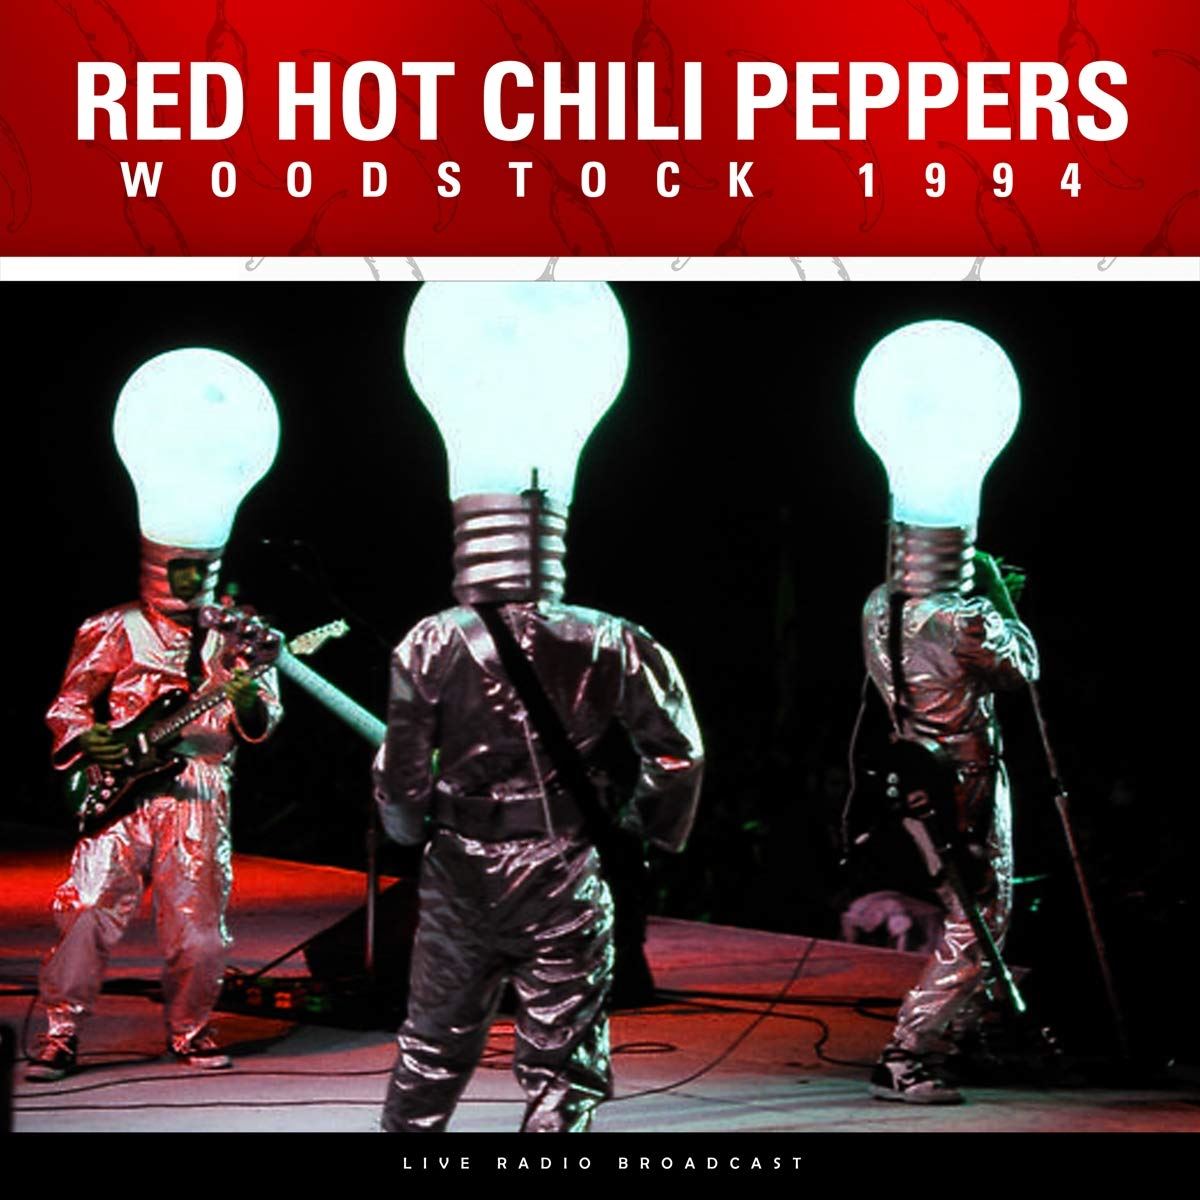 Red Hot Chili Peppers - Best Of Woodstock 1994 - Vinyl